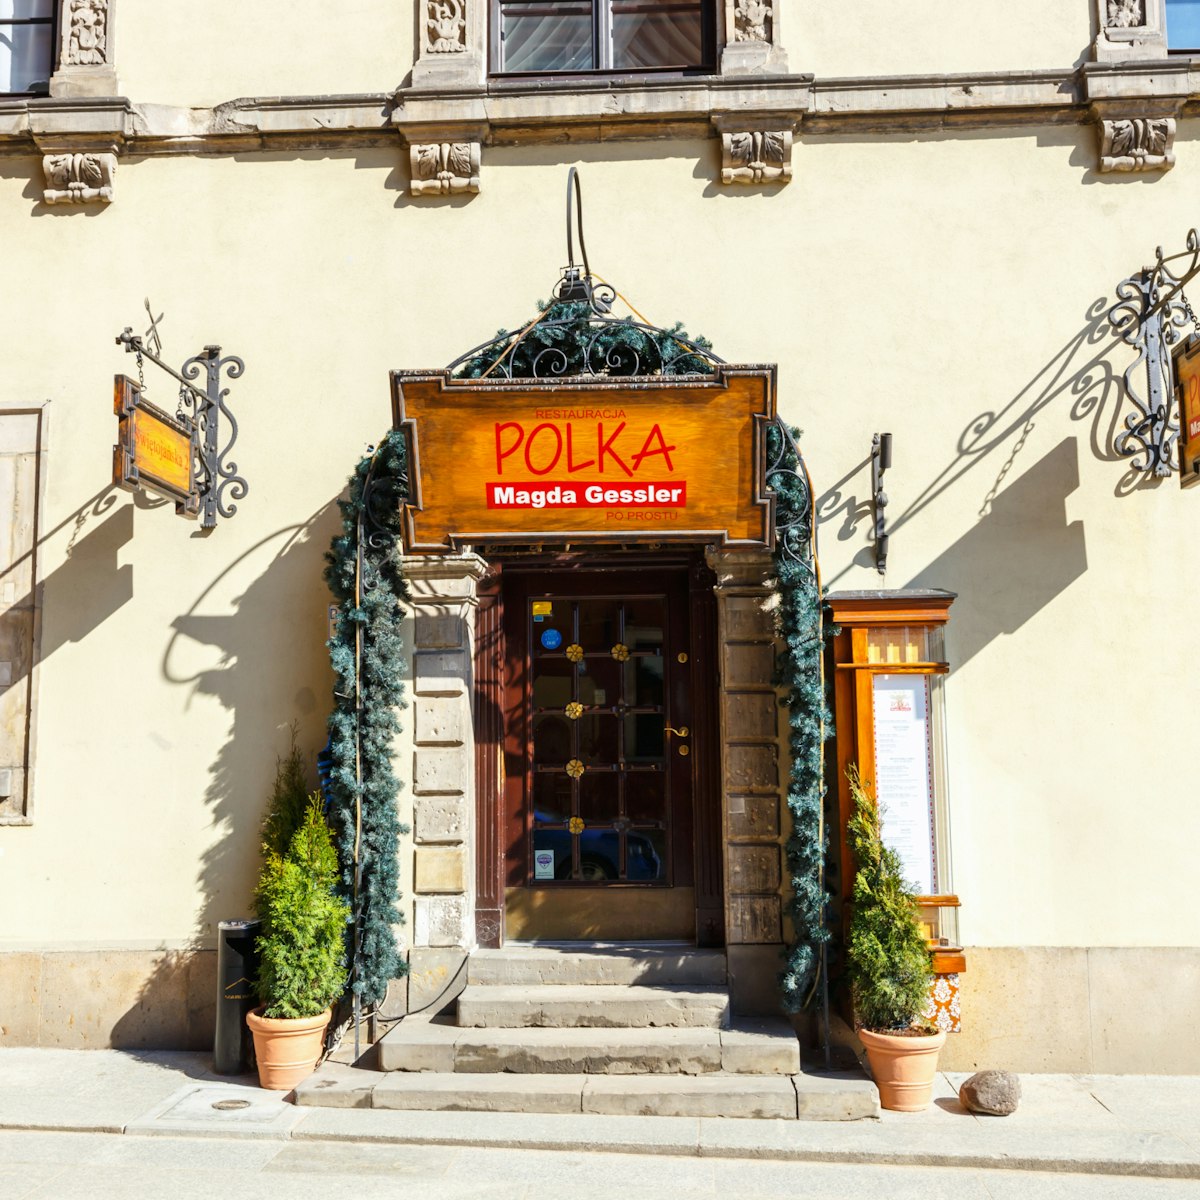 WARSAW, POLAND, 13 march 2016: Restaurant in old town in Warsaw in a sunny day. Warsaw is the capital of Poland; Shutterstock ID 393660925; Your name (First / Last): Lauren Gillmore; GL account no.: 56530; Netsuite department name: Online-Design; Full Product or Project name including edition: 65050/ Online Design /LaurenGillmore/POI